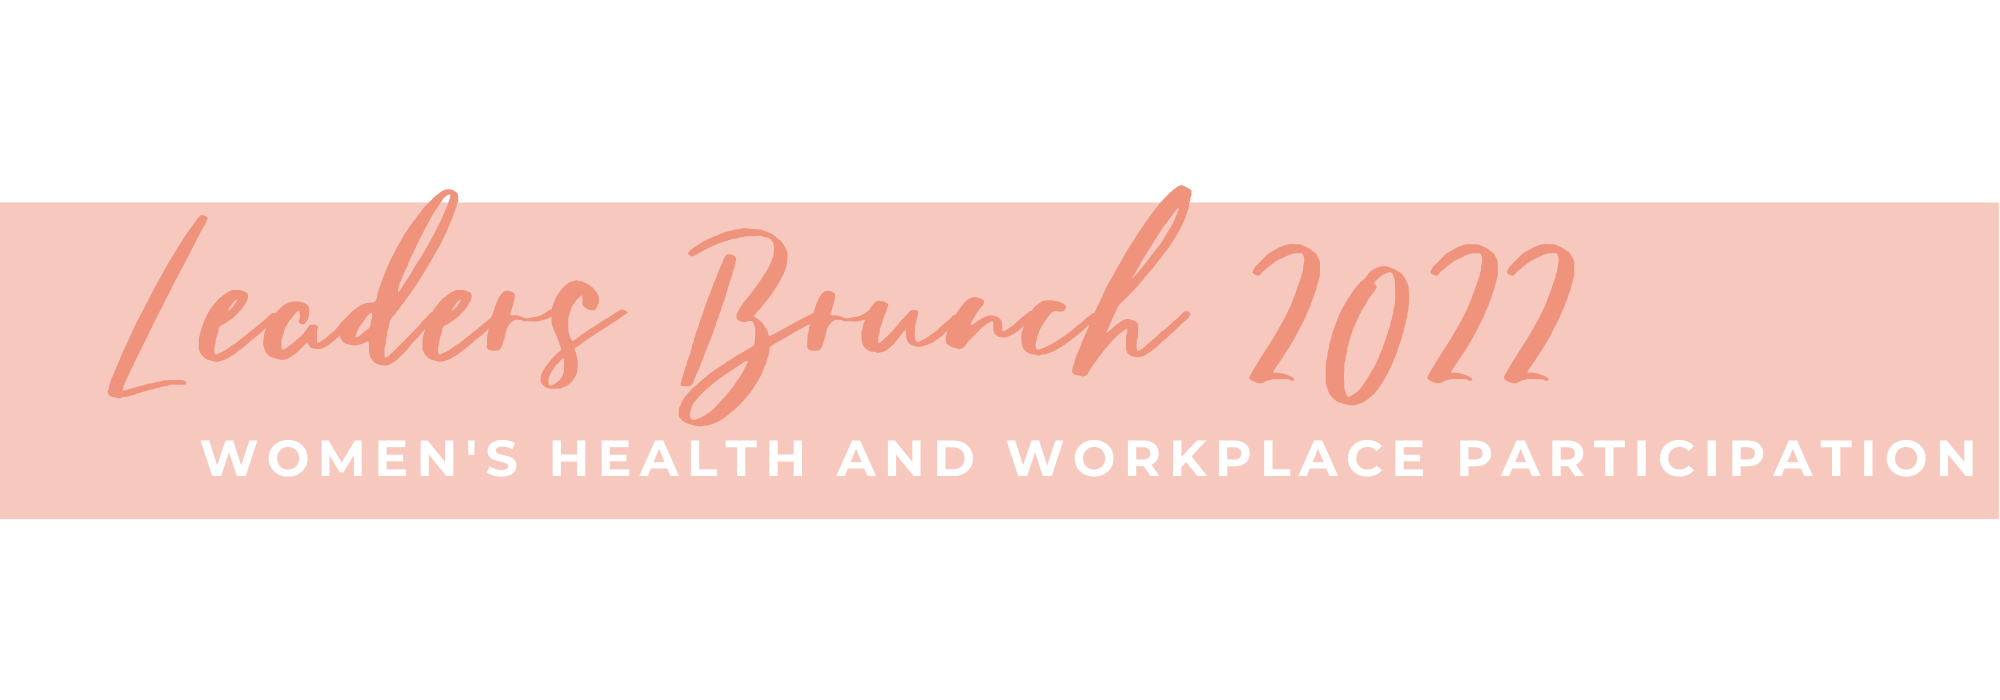 Leaders Brunch 2022: Women's Health and Workplace Participation